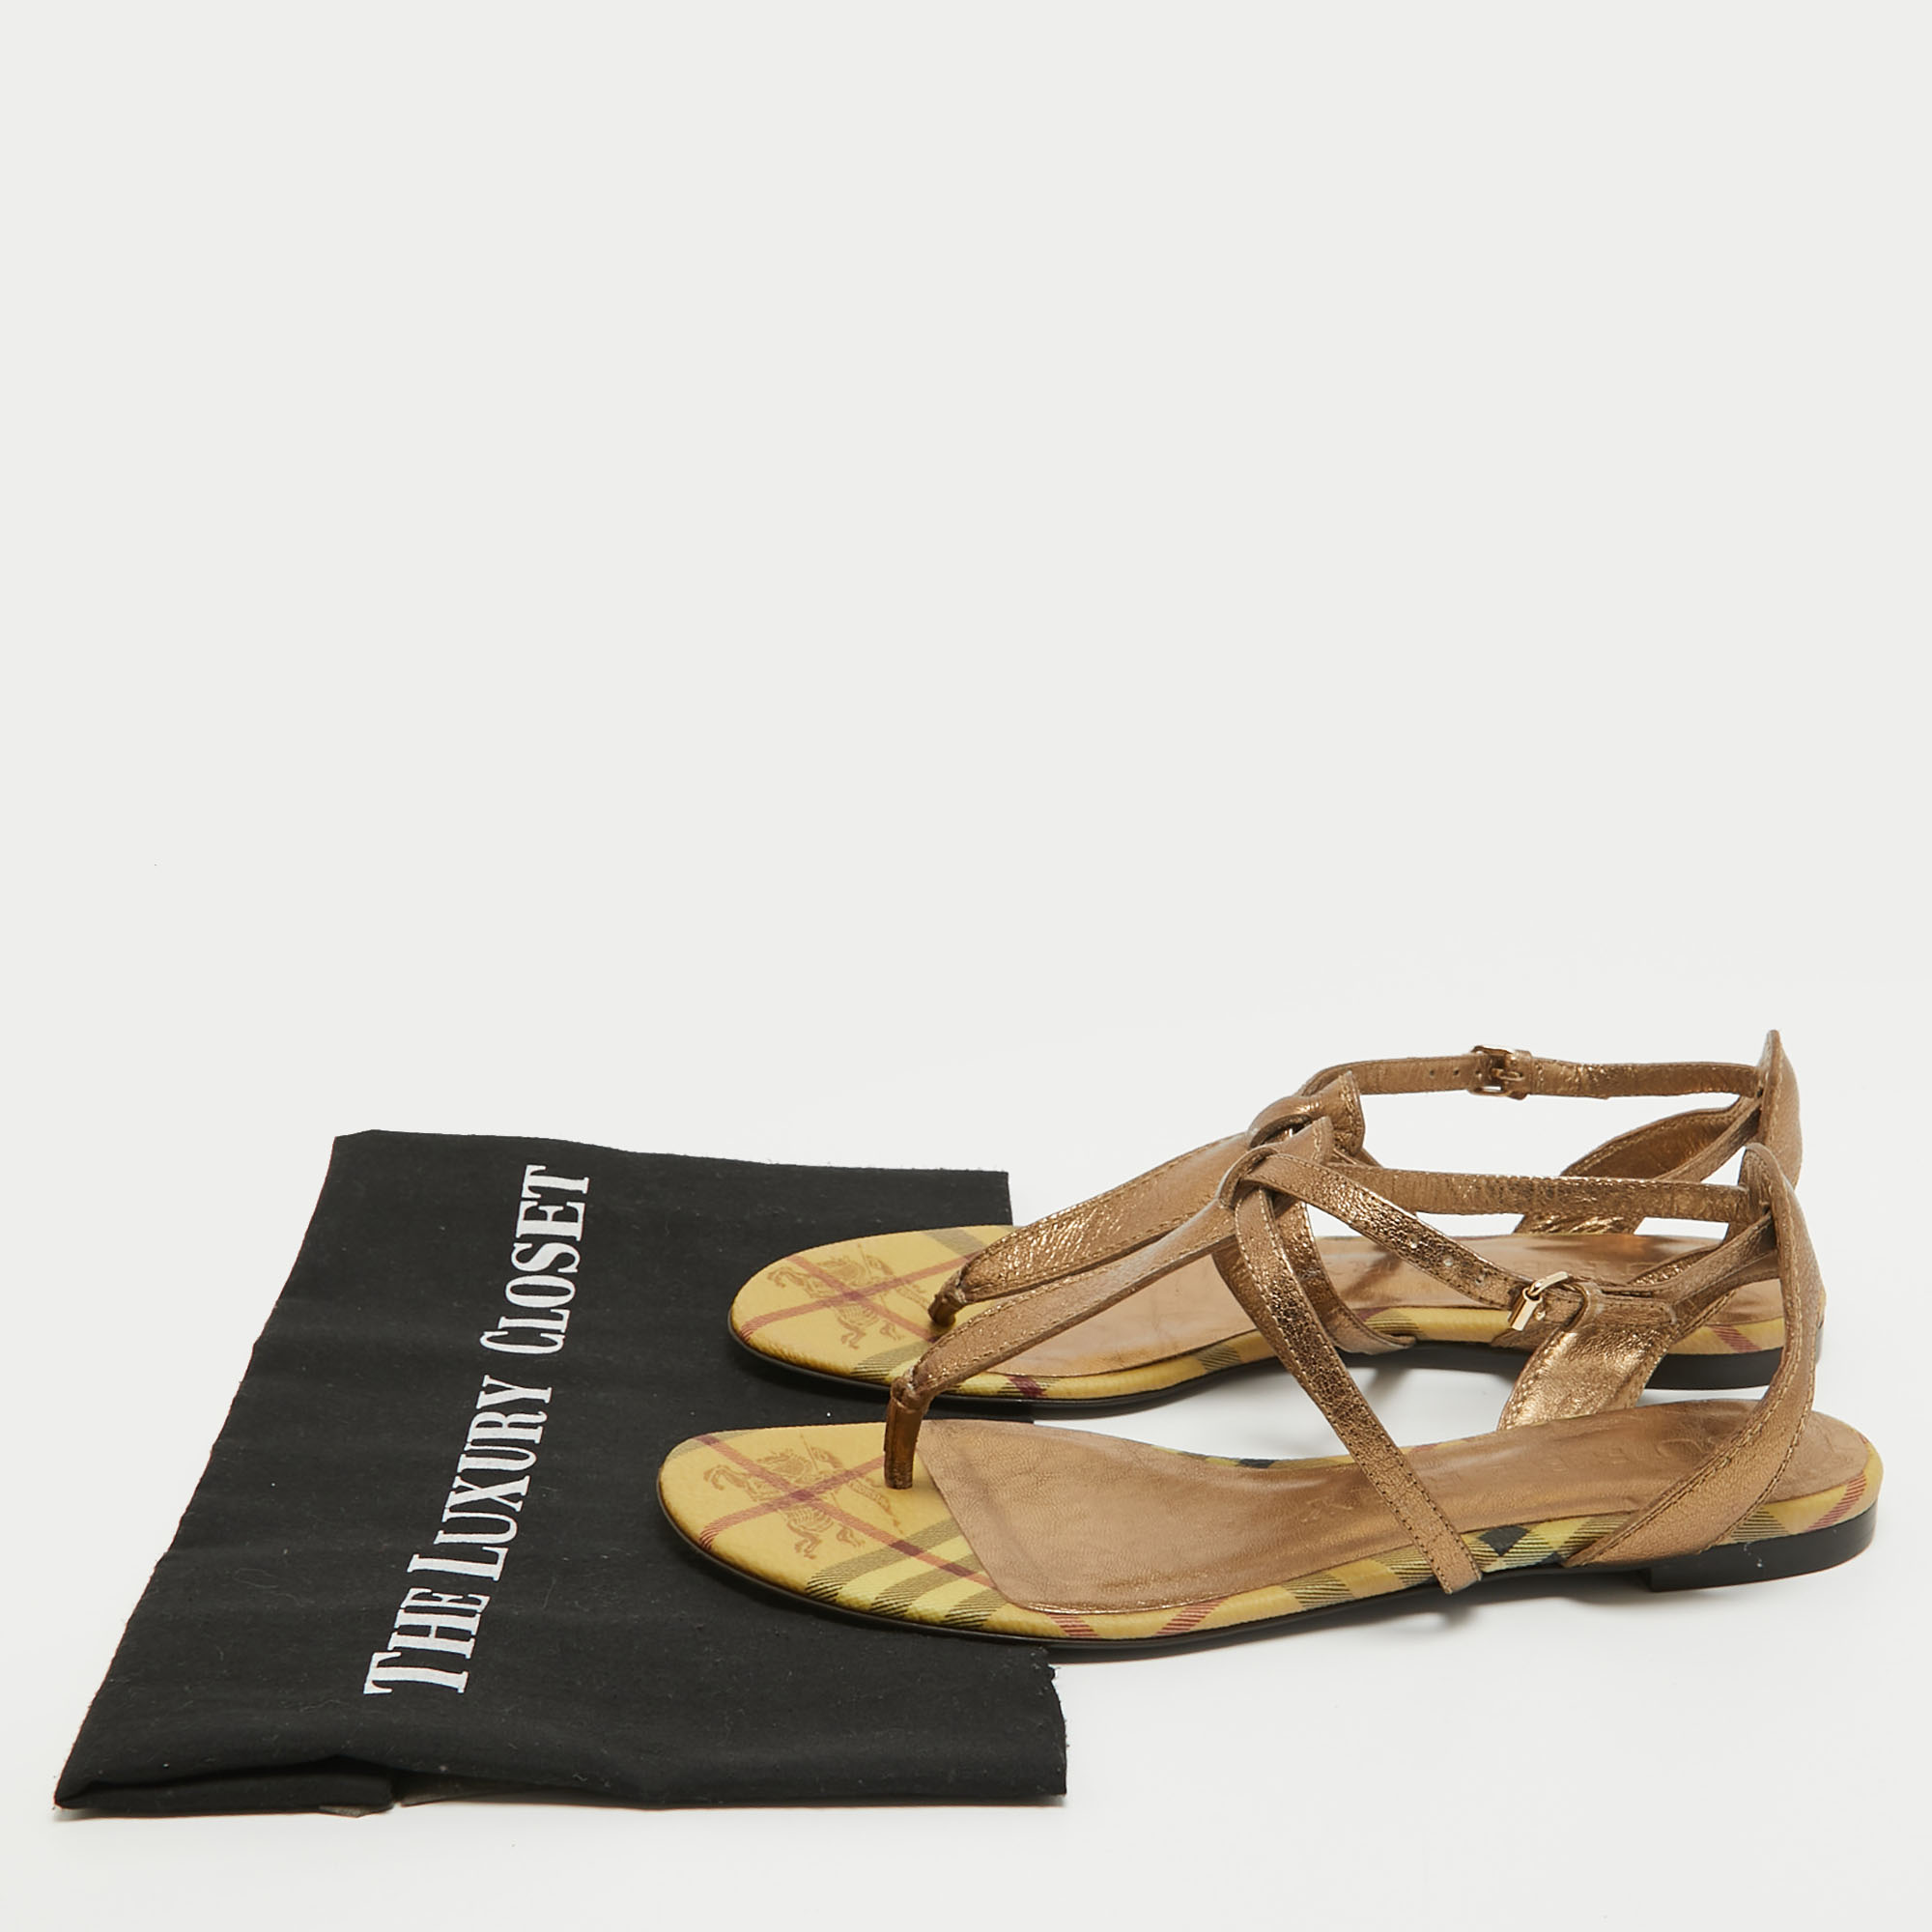 Burberry Metallic Gold Leather Thong Ankle Strap Flat Sandals Size 39